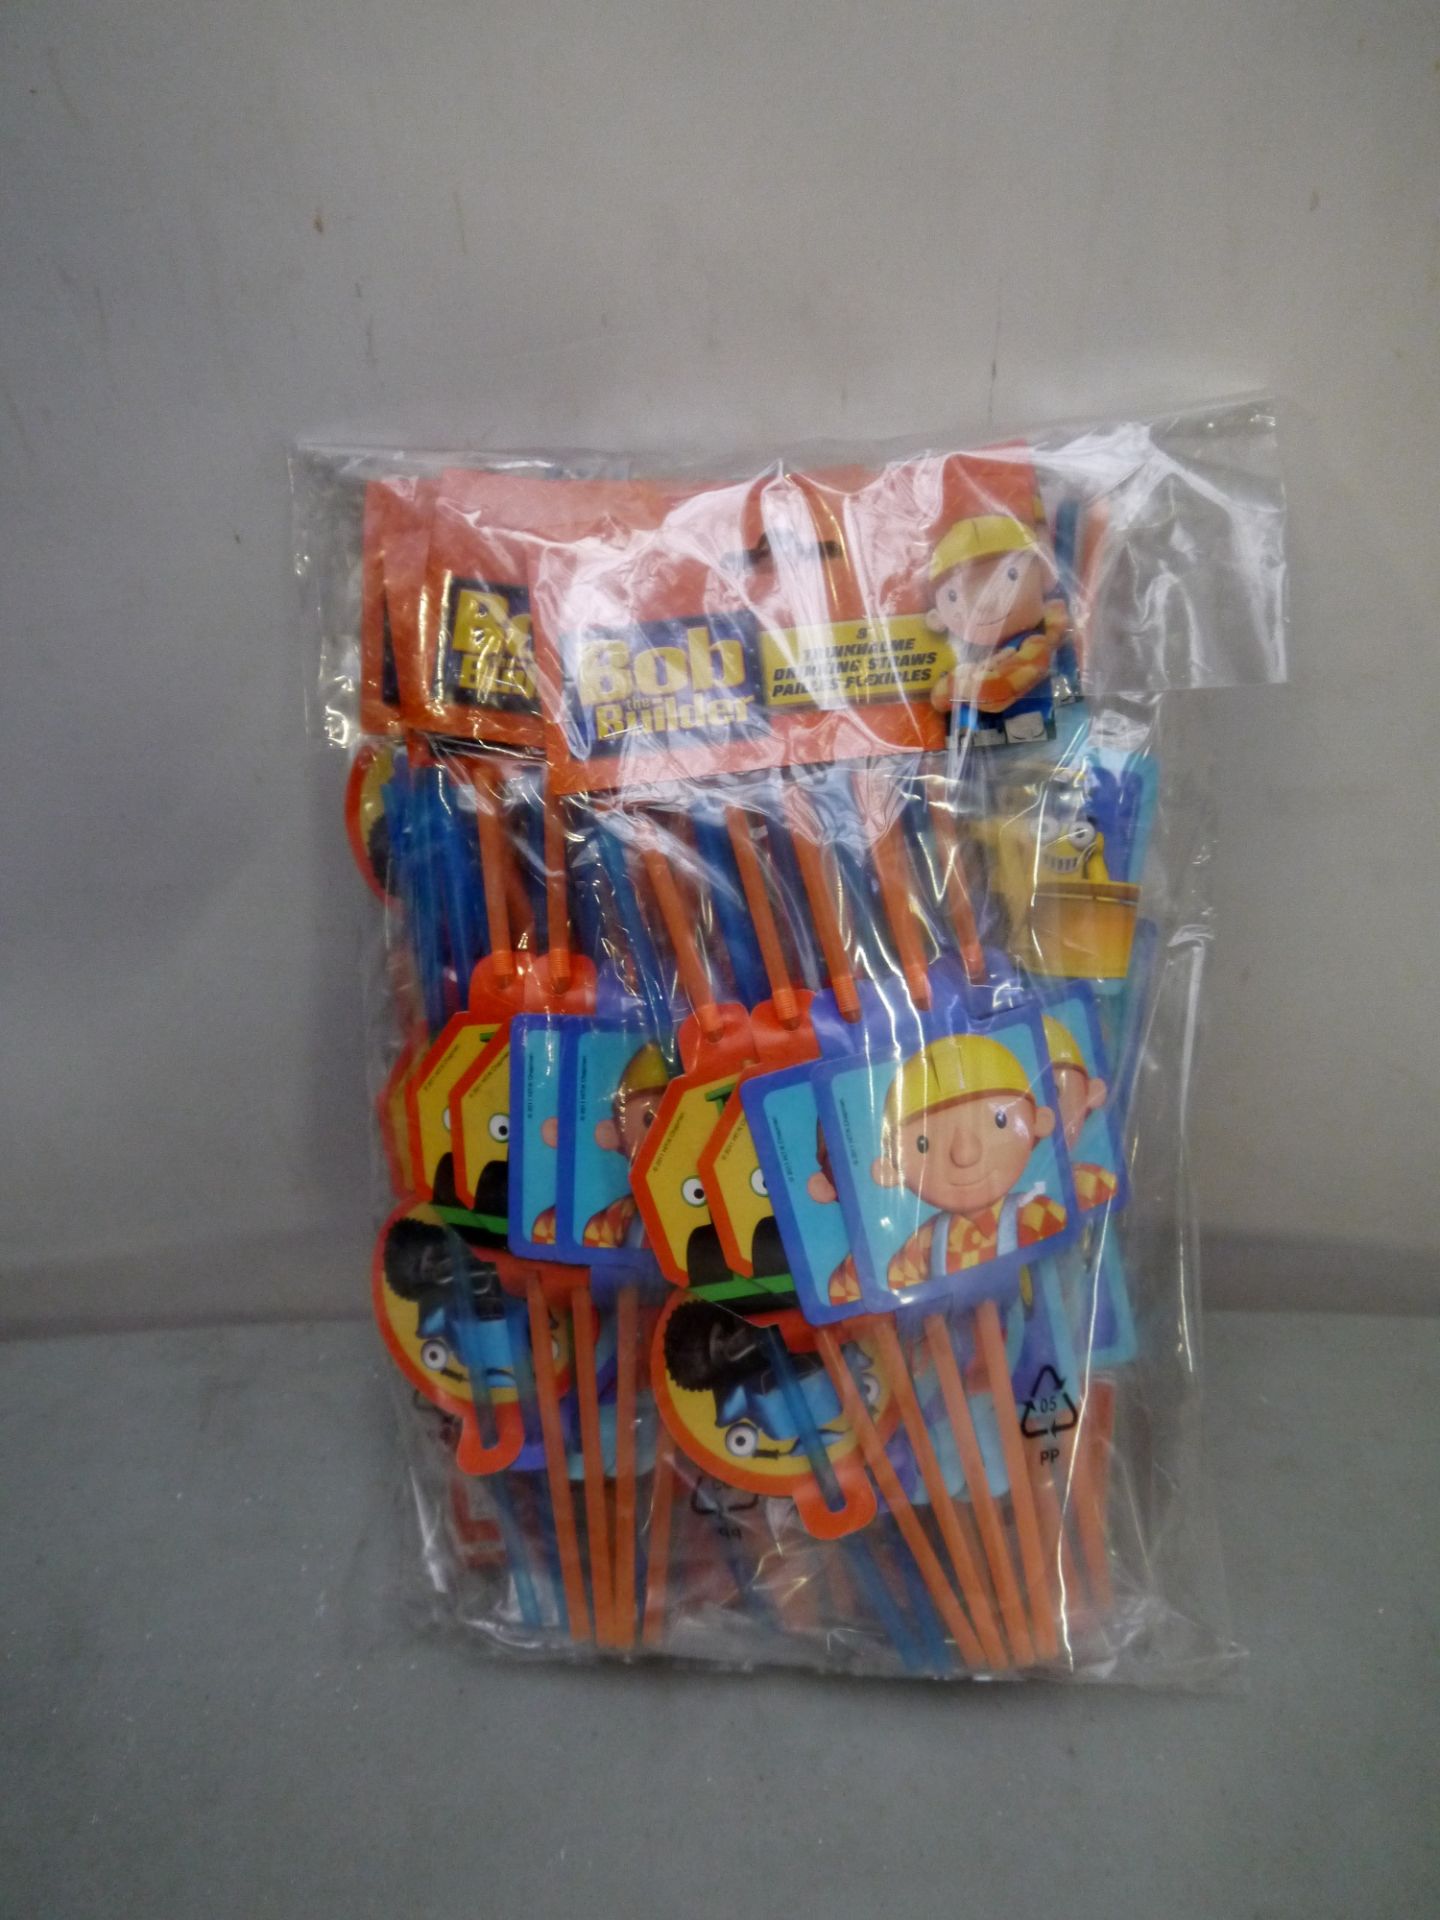 10 packs of 8 Bob the Builder Drinking Straws, Boxed.